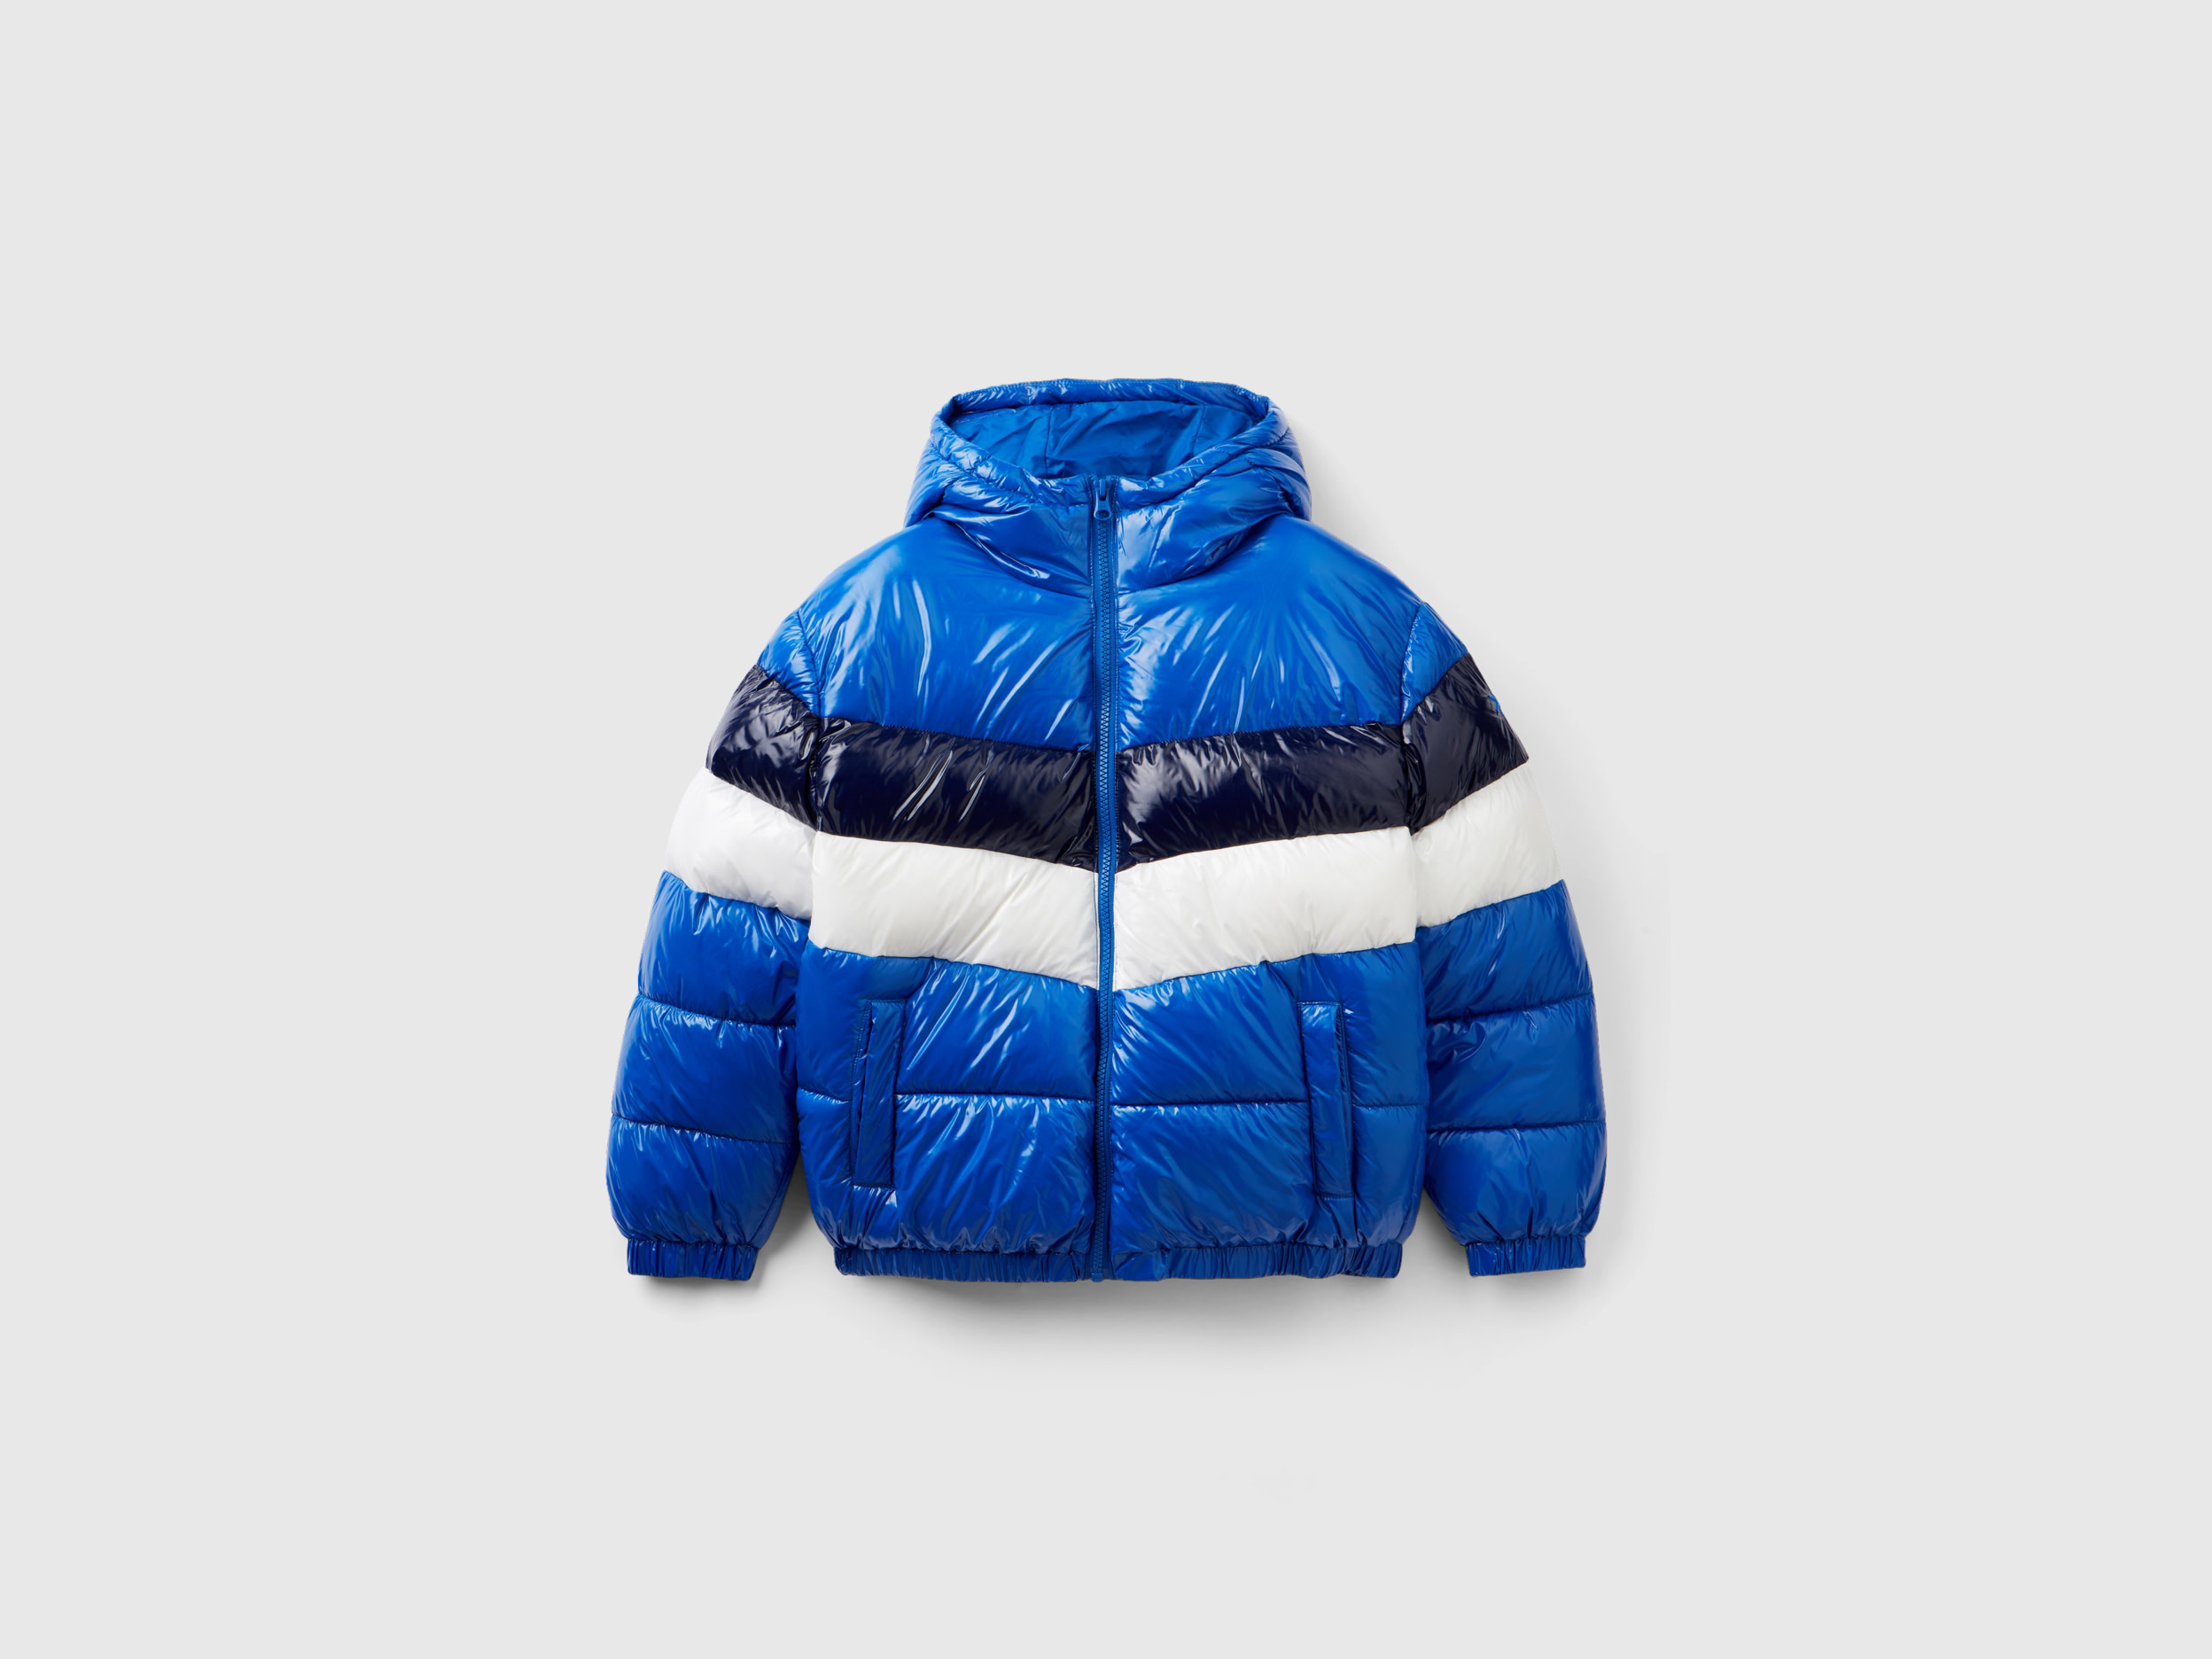 Benetton, Oversized Fit Color Block Padded Jacket, size M, Bright Blue, Kids